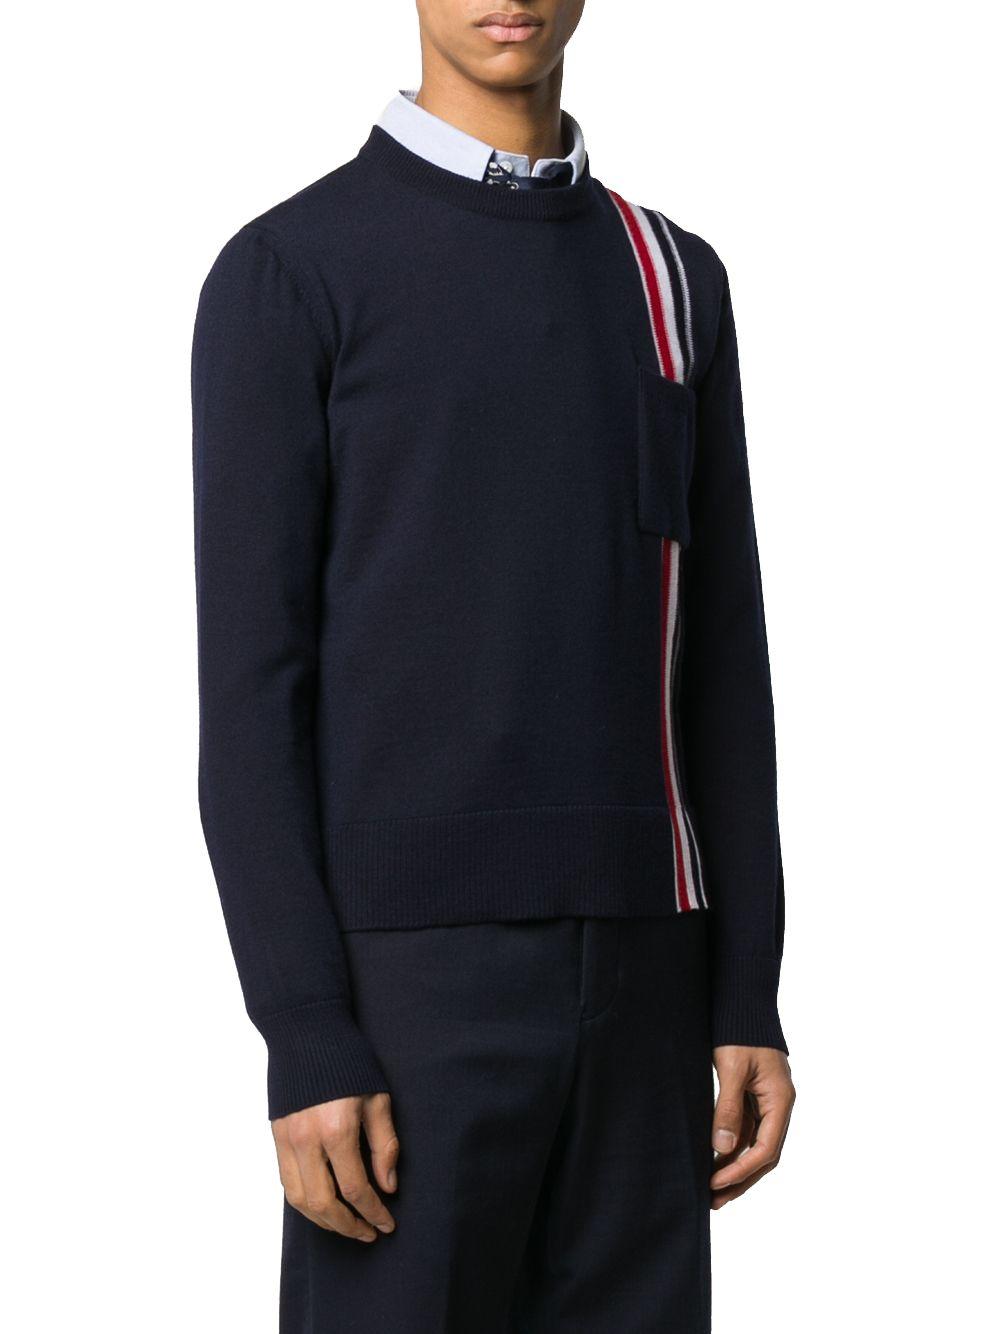 Thom Browne Wool Sweater in Blue for Men - Lyst